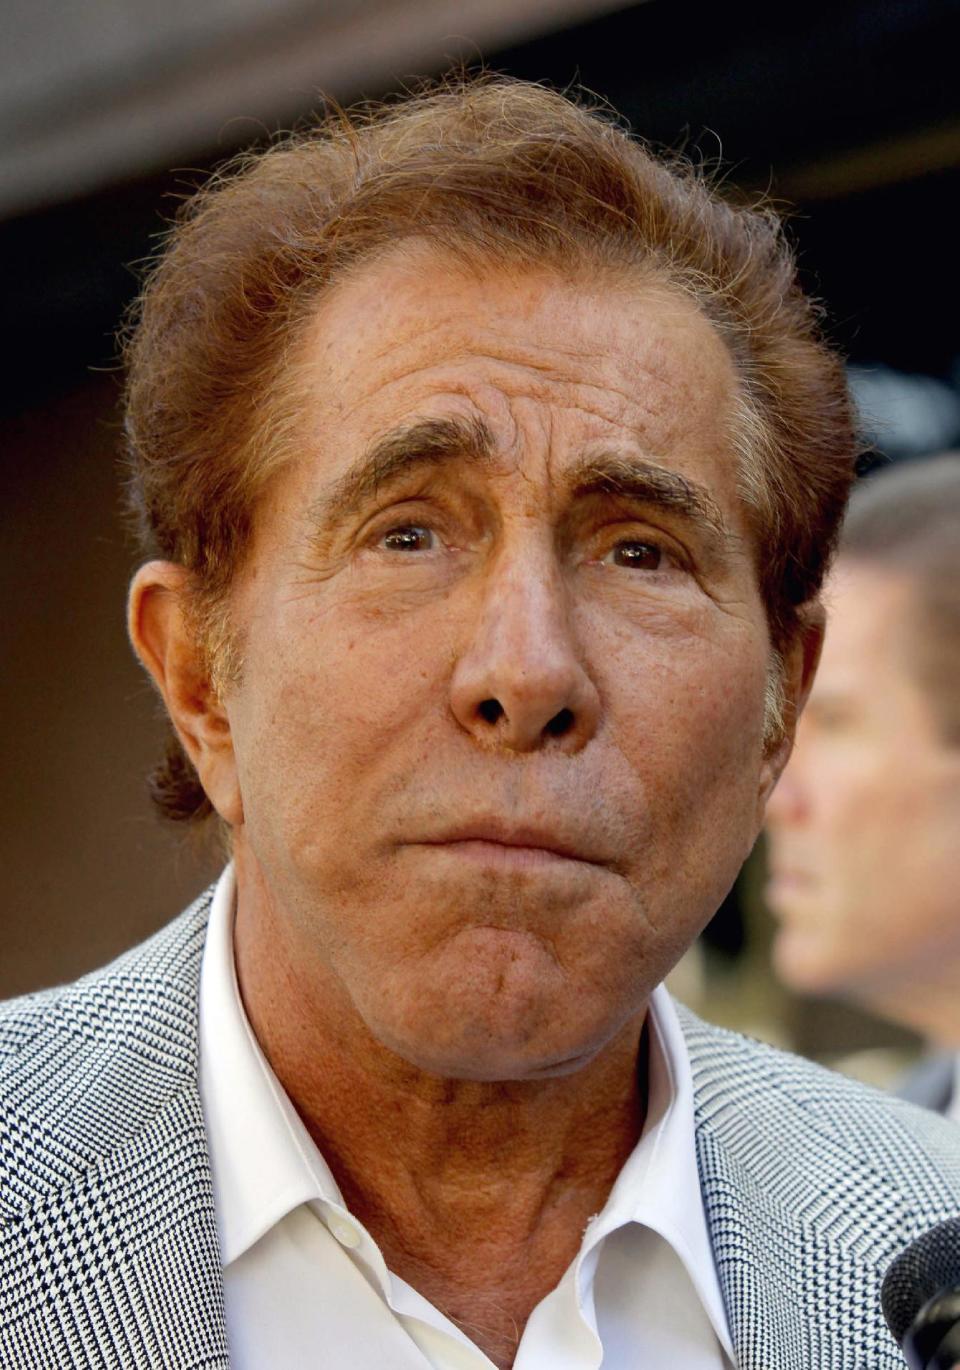 FILE - In this Sept. 7, 2012 file photo, casino mogul Steve Wynn arrives at court for his slander trial in Los Angeles. A Los Angeles jury on Monday Sept. 10, 2012 awarded Wynn a $20 million judgment against “Girls Gone Wild” founder Joe Francis in a slander trial. Francis had claimed Wynn threatened to kill him and bury him in the desert, but the jury determined that there was substantial evidence Francis knew the statements were false when he made them. (AP Photo/Nick Ut, File)